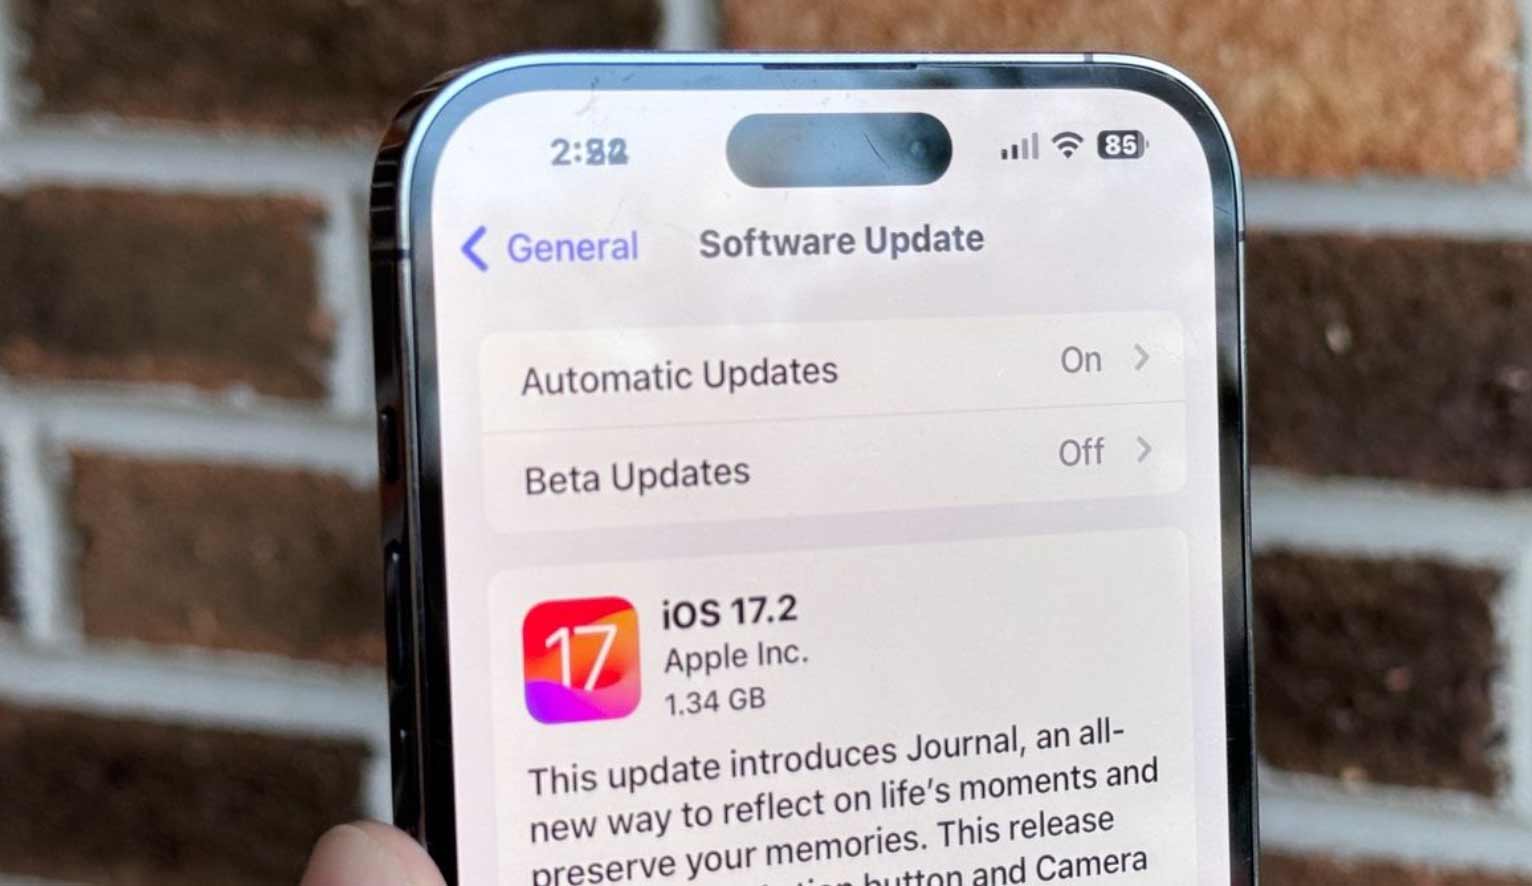 Apple iOS 17.2 Update Delays These Two Much-Awaited Features